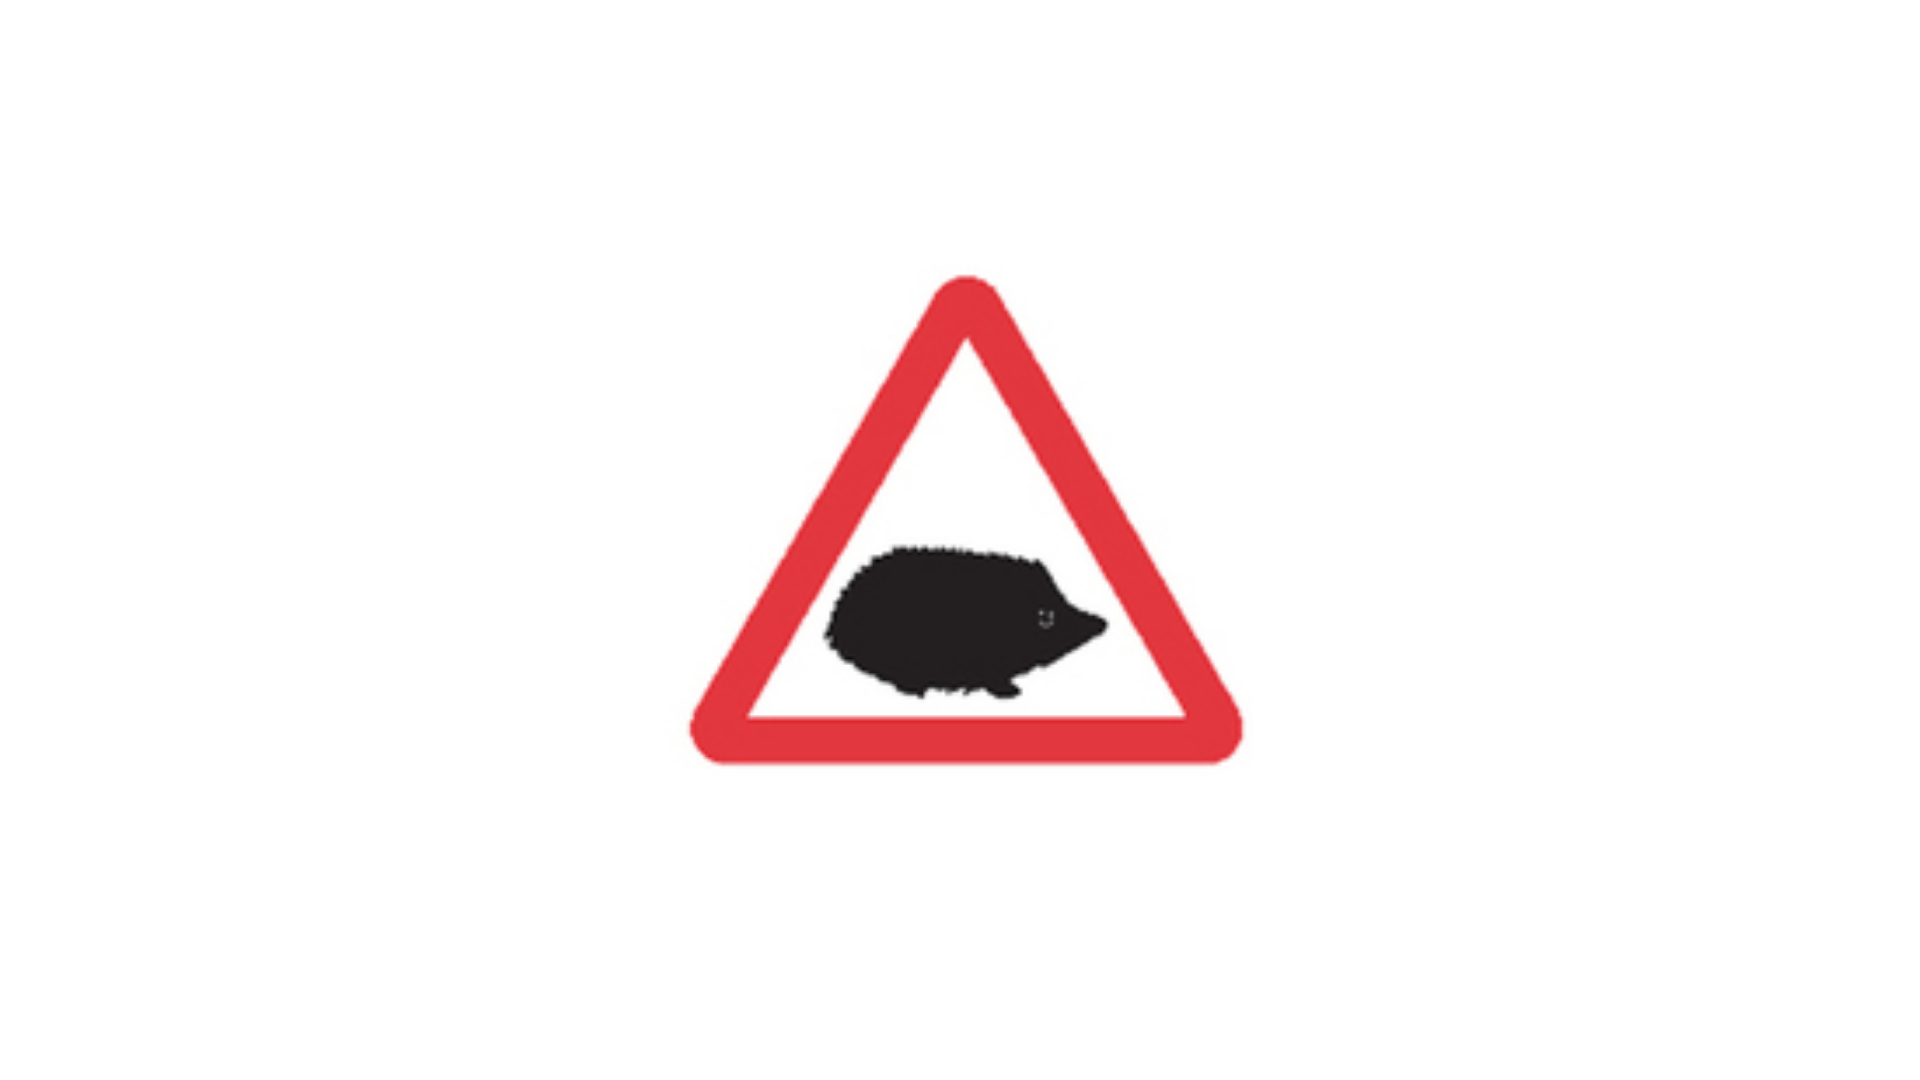 New road signs to help reduce wildlife collisions